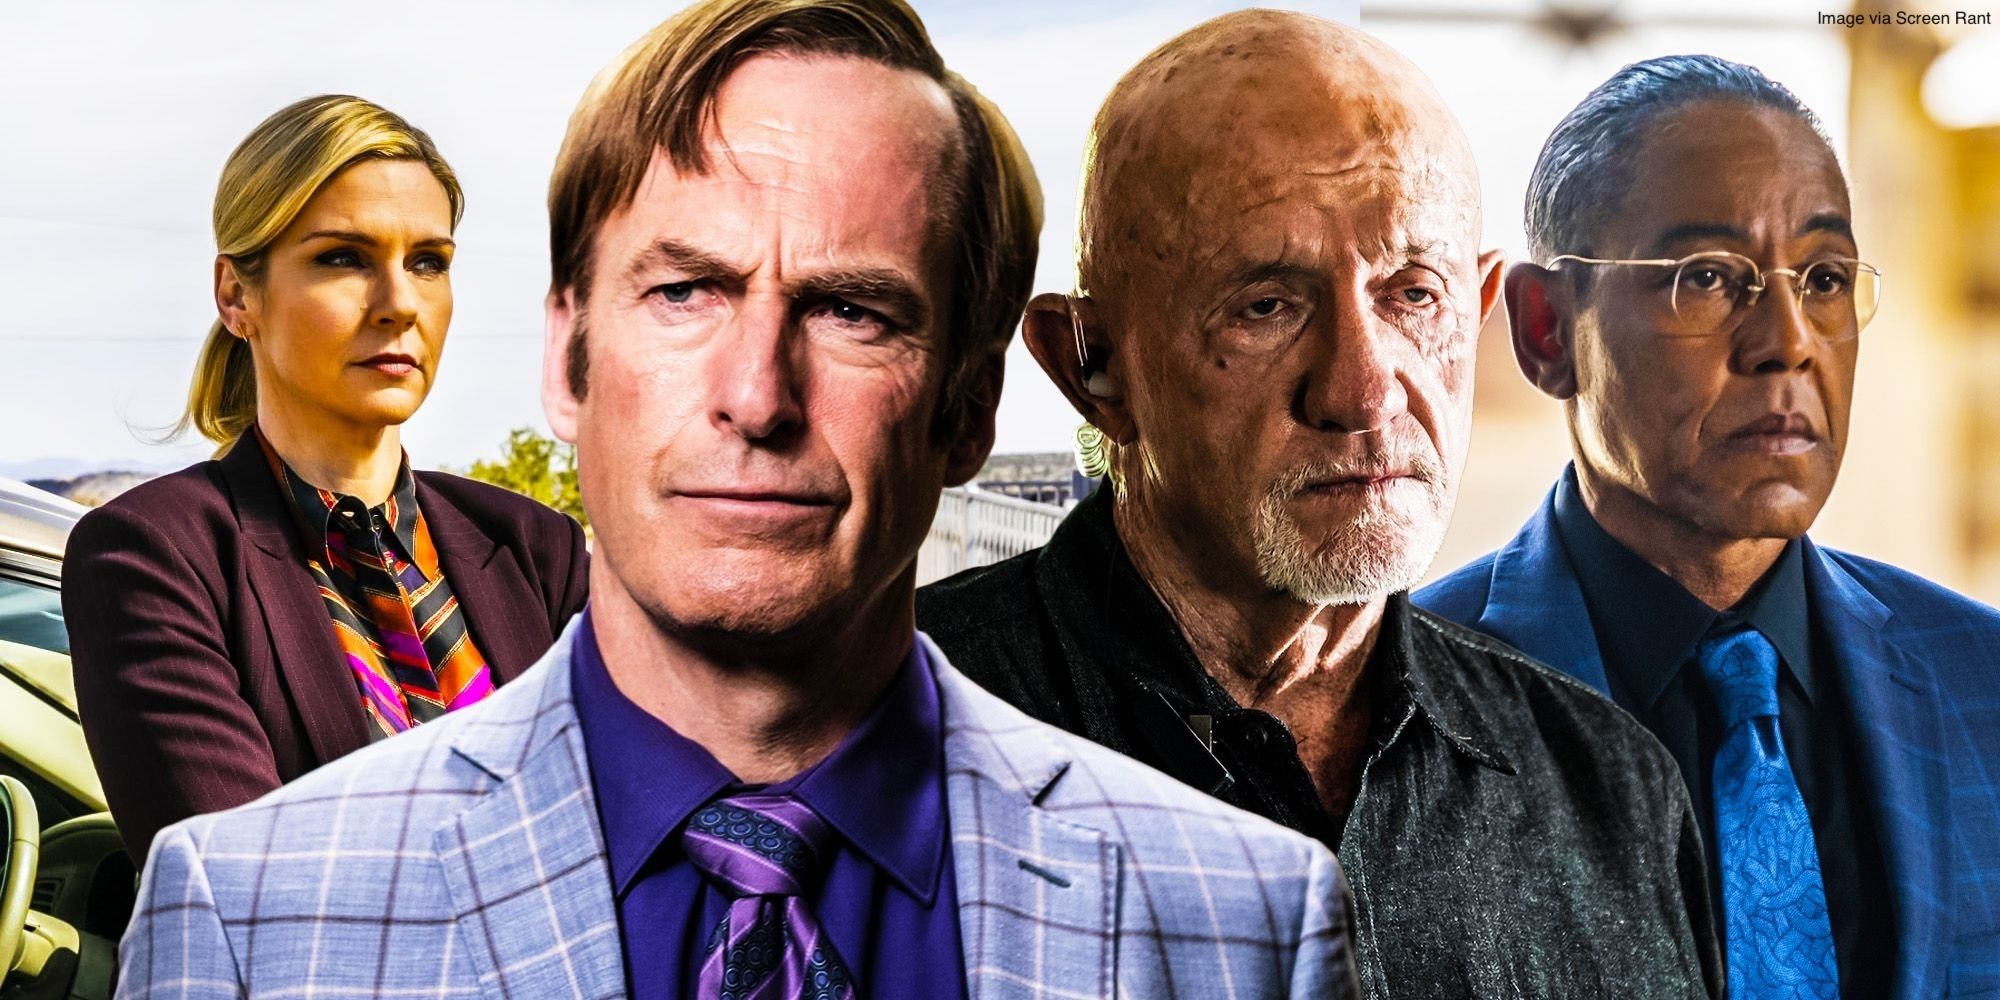 Cast Better Call Saul 10 Worthy Performances to Watch From The Cast of 'Better Call Saul'